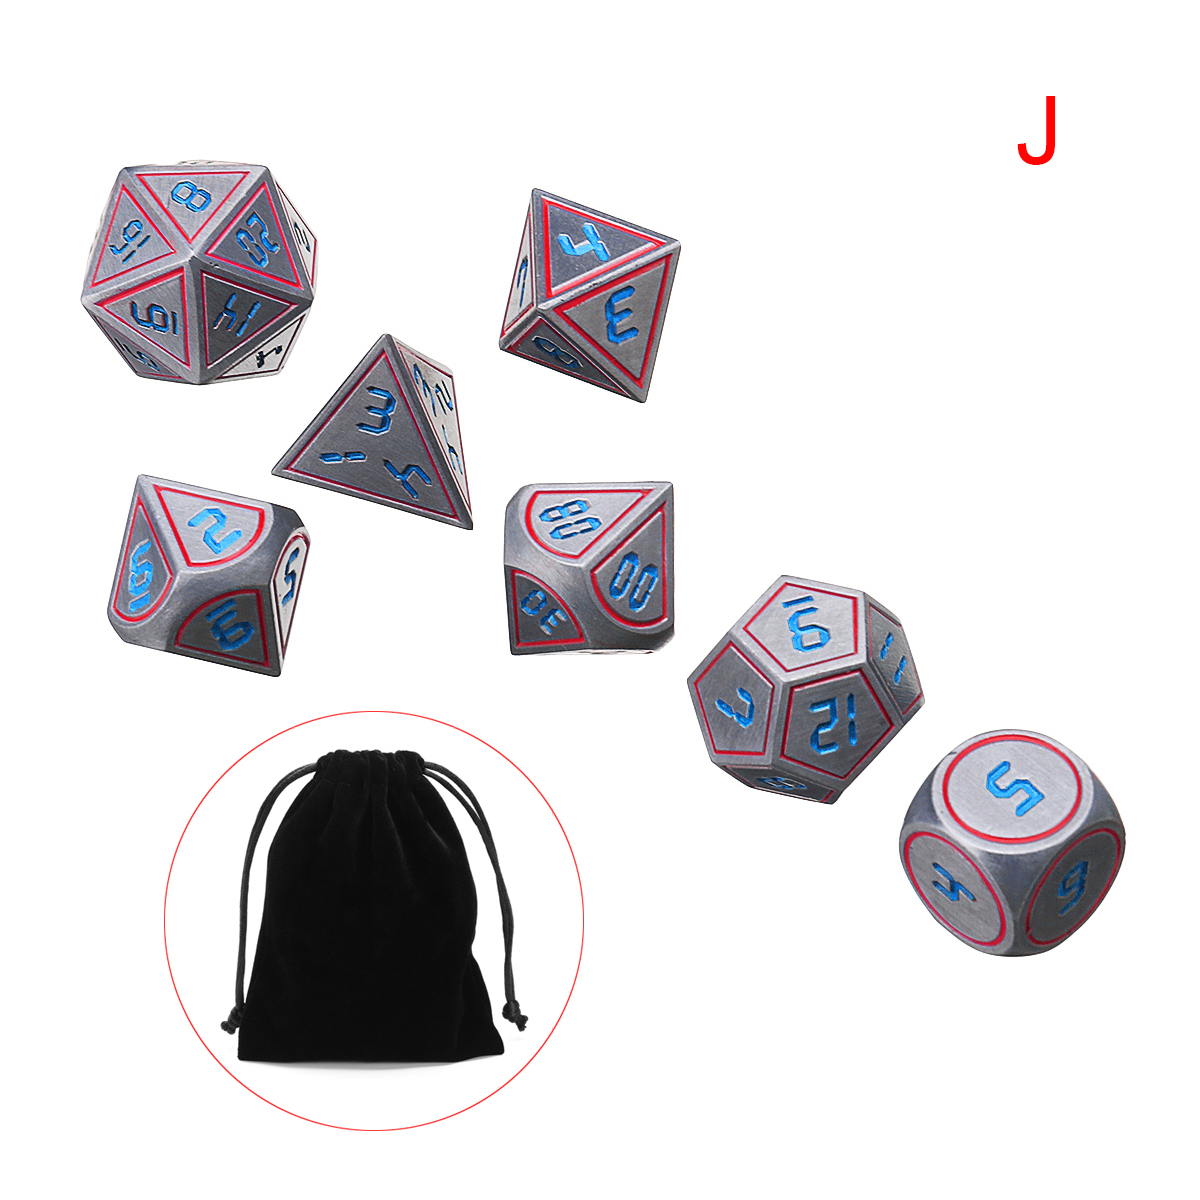 7Pcs-Double-Color-Polyhedral-Metal-Game-Dices-Kit-Children-Digital-Education-Number-Dices-Entertianm-1431443-5